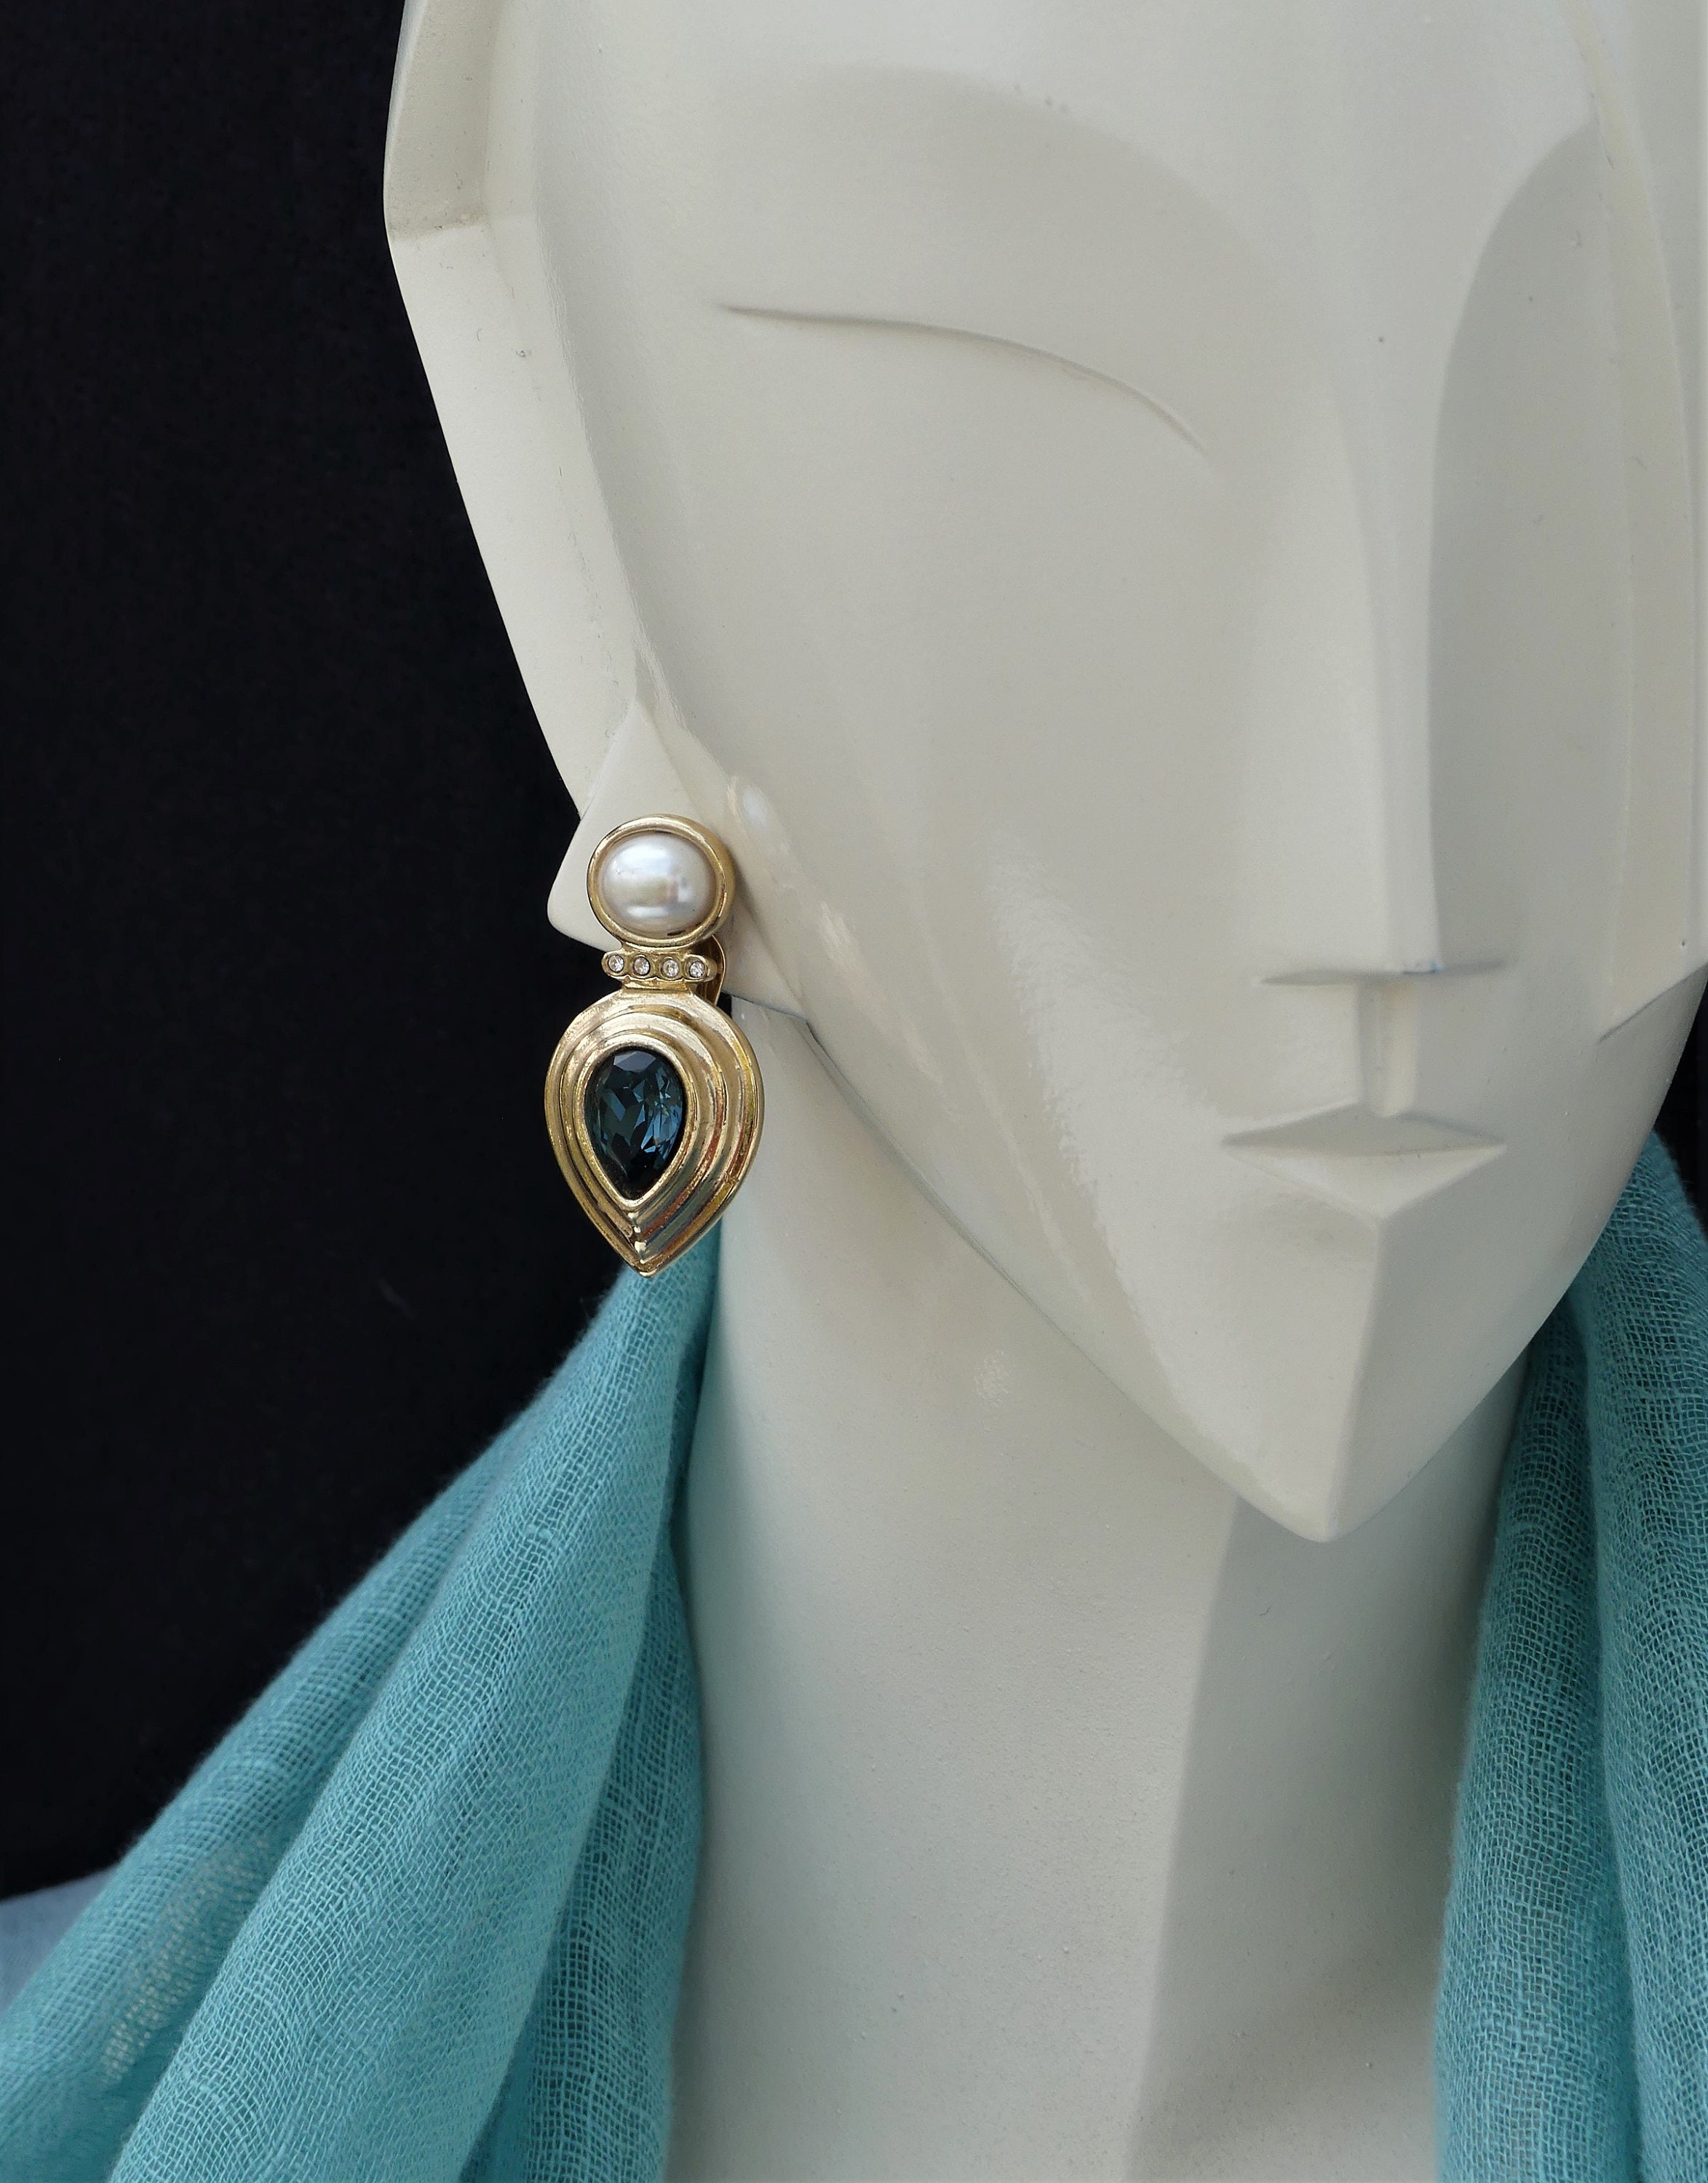 Vintage 1980s Large Faux Pearl and Diamanté Clip-On Earrings, with Large Sapphire Teardrop Diamanté Stones, Gold-Plated Statement Earrings